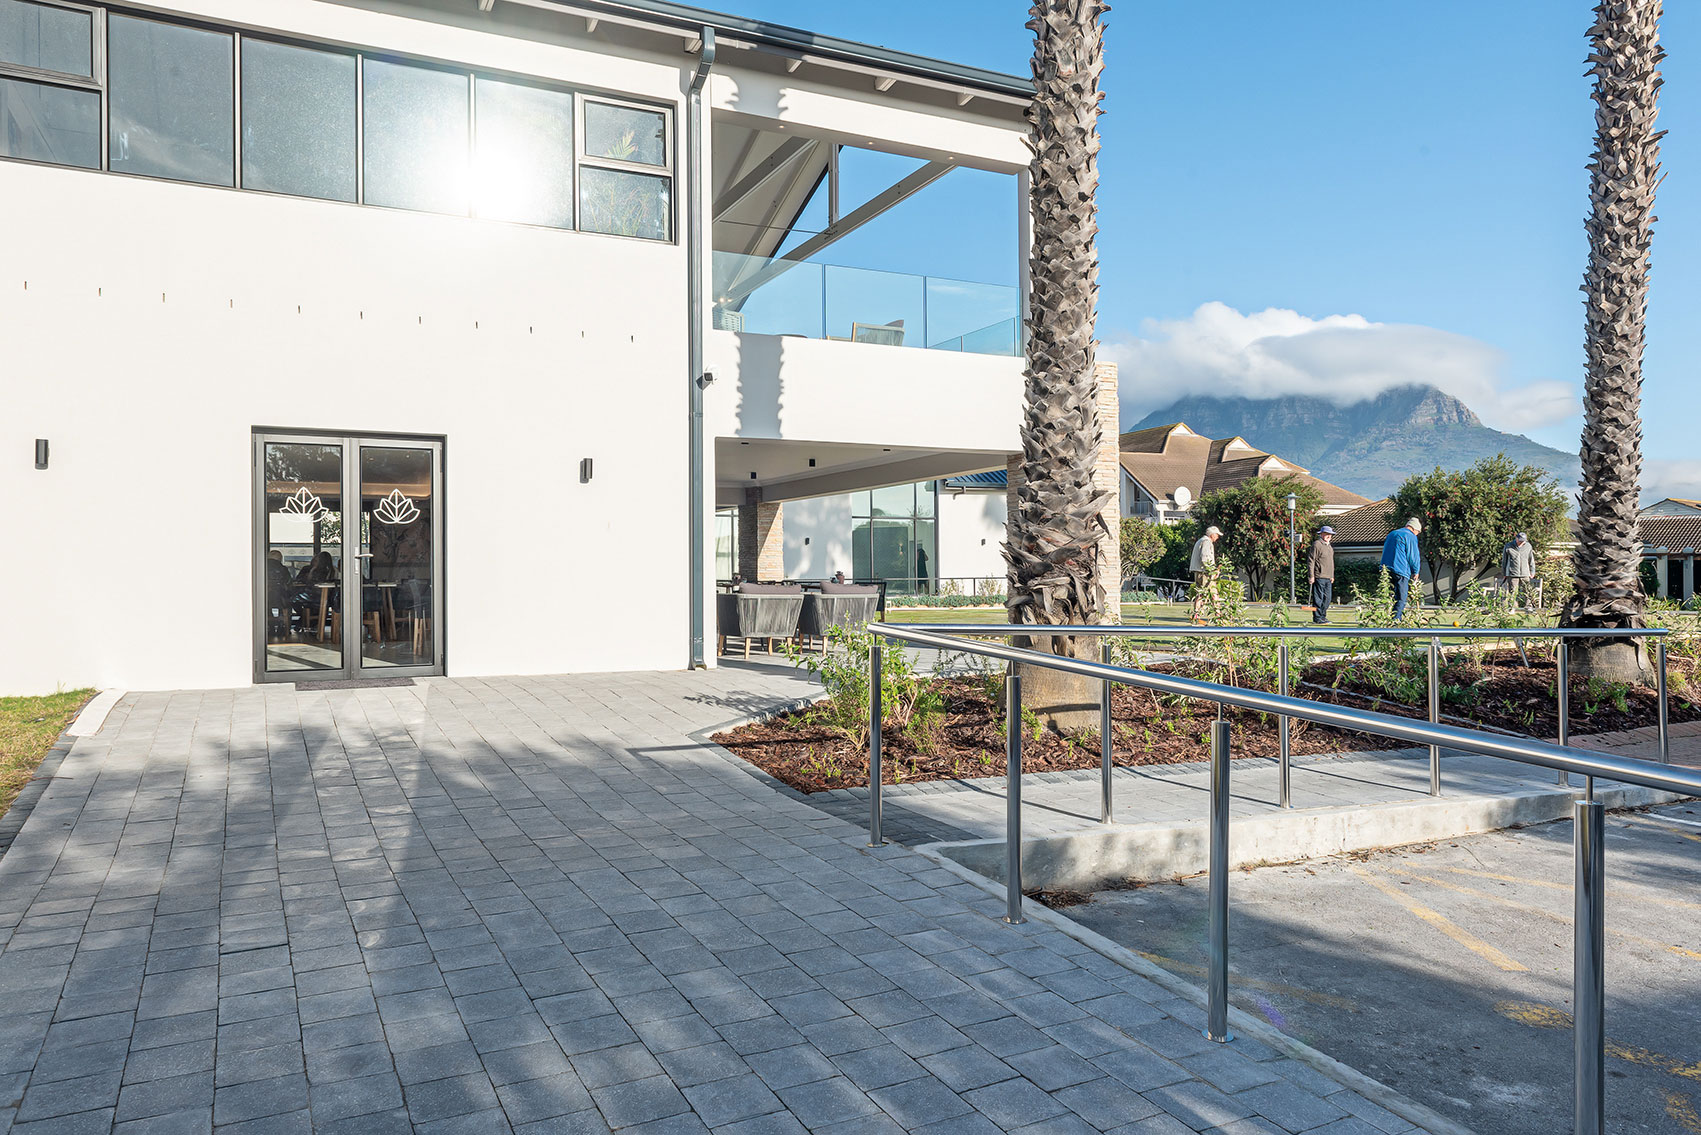 Newly renovated wellness center at Woodside Village with view of the mountains